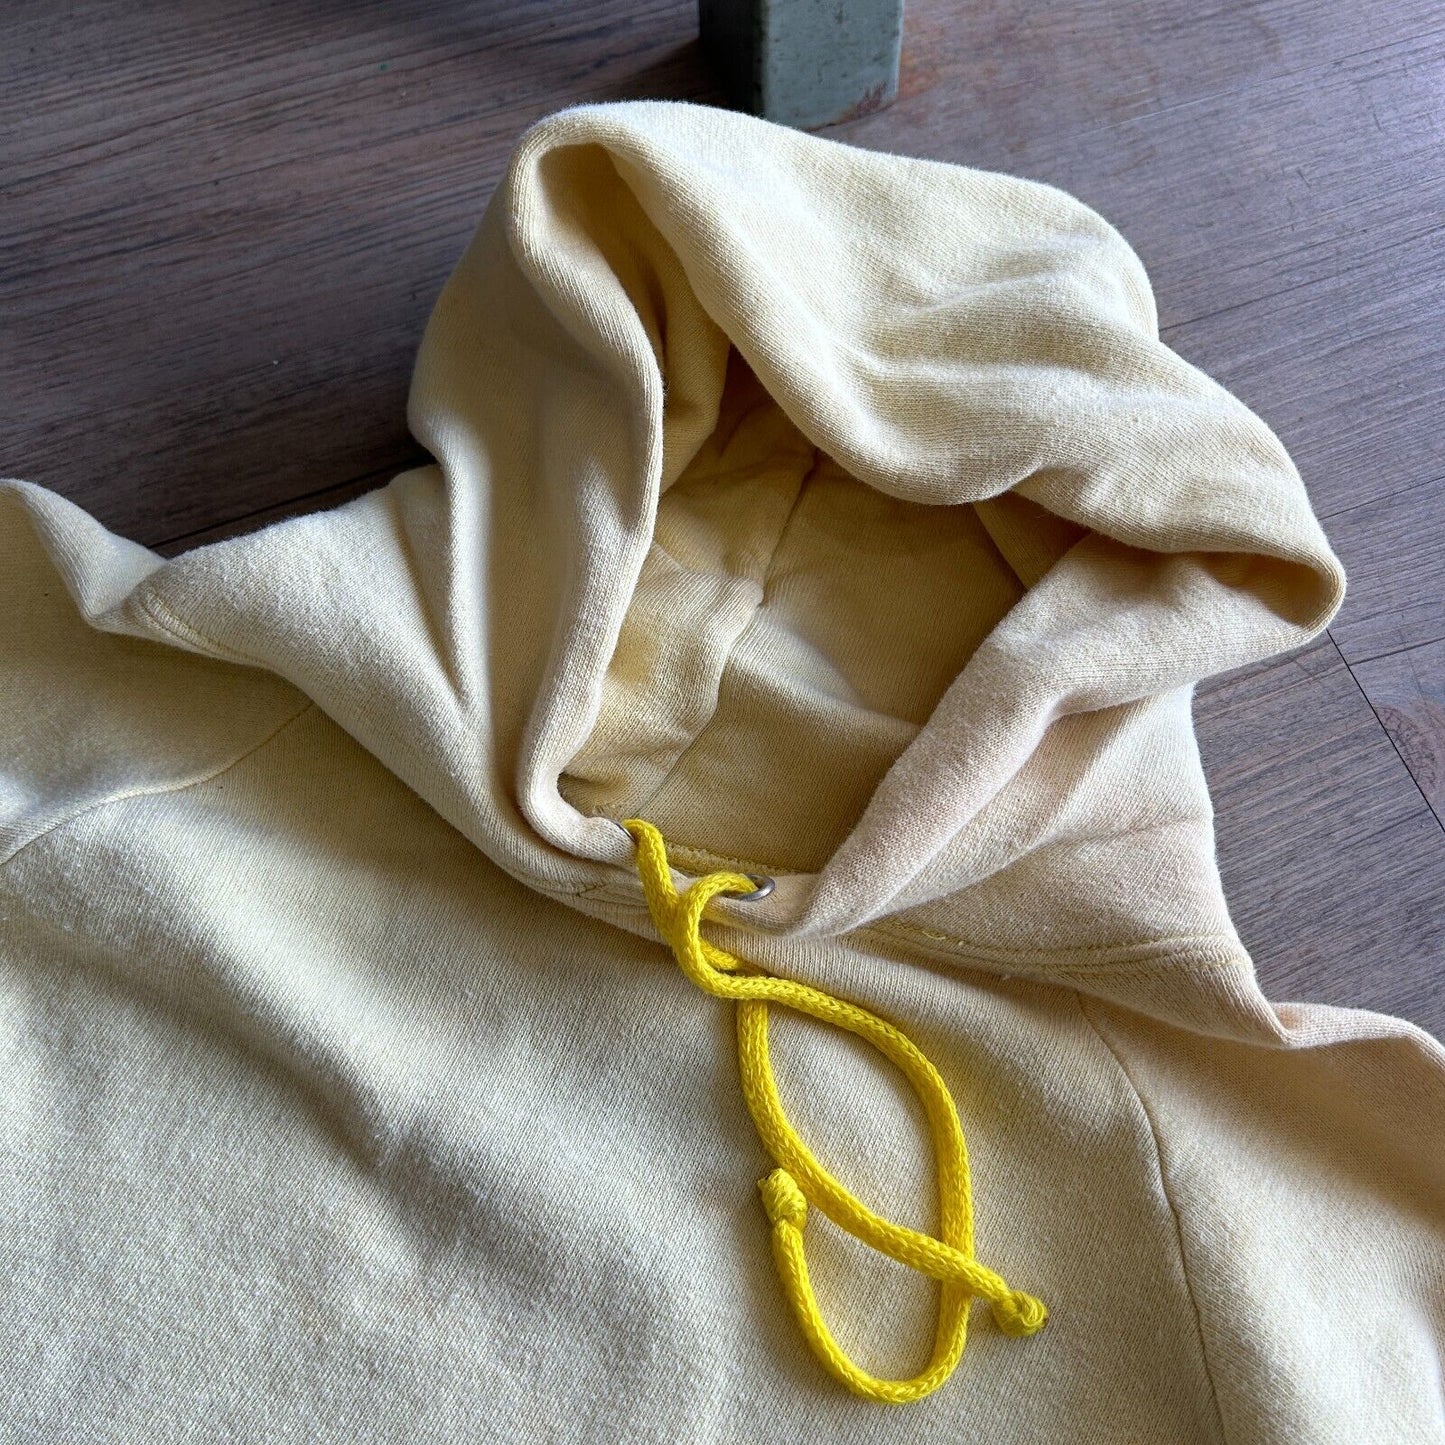 VINTAGE 60s 70s | Light Yellow Faded Blank Hoodie Sweater sz S Adult